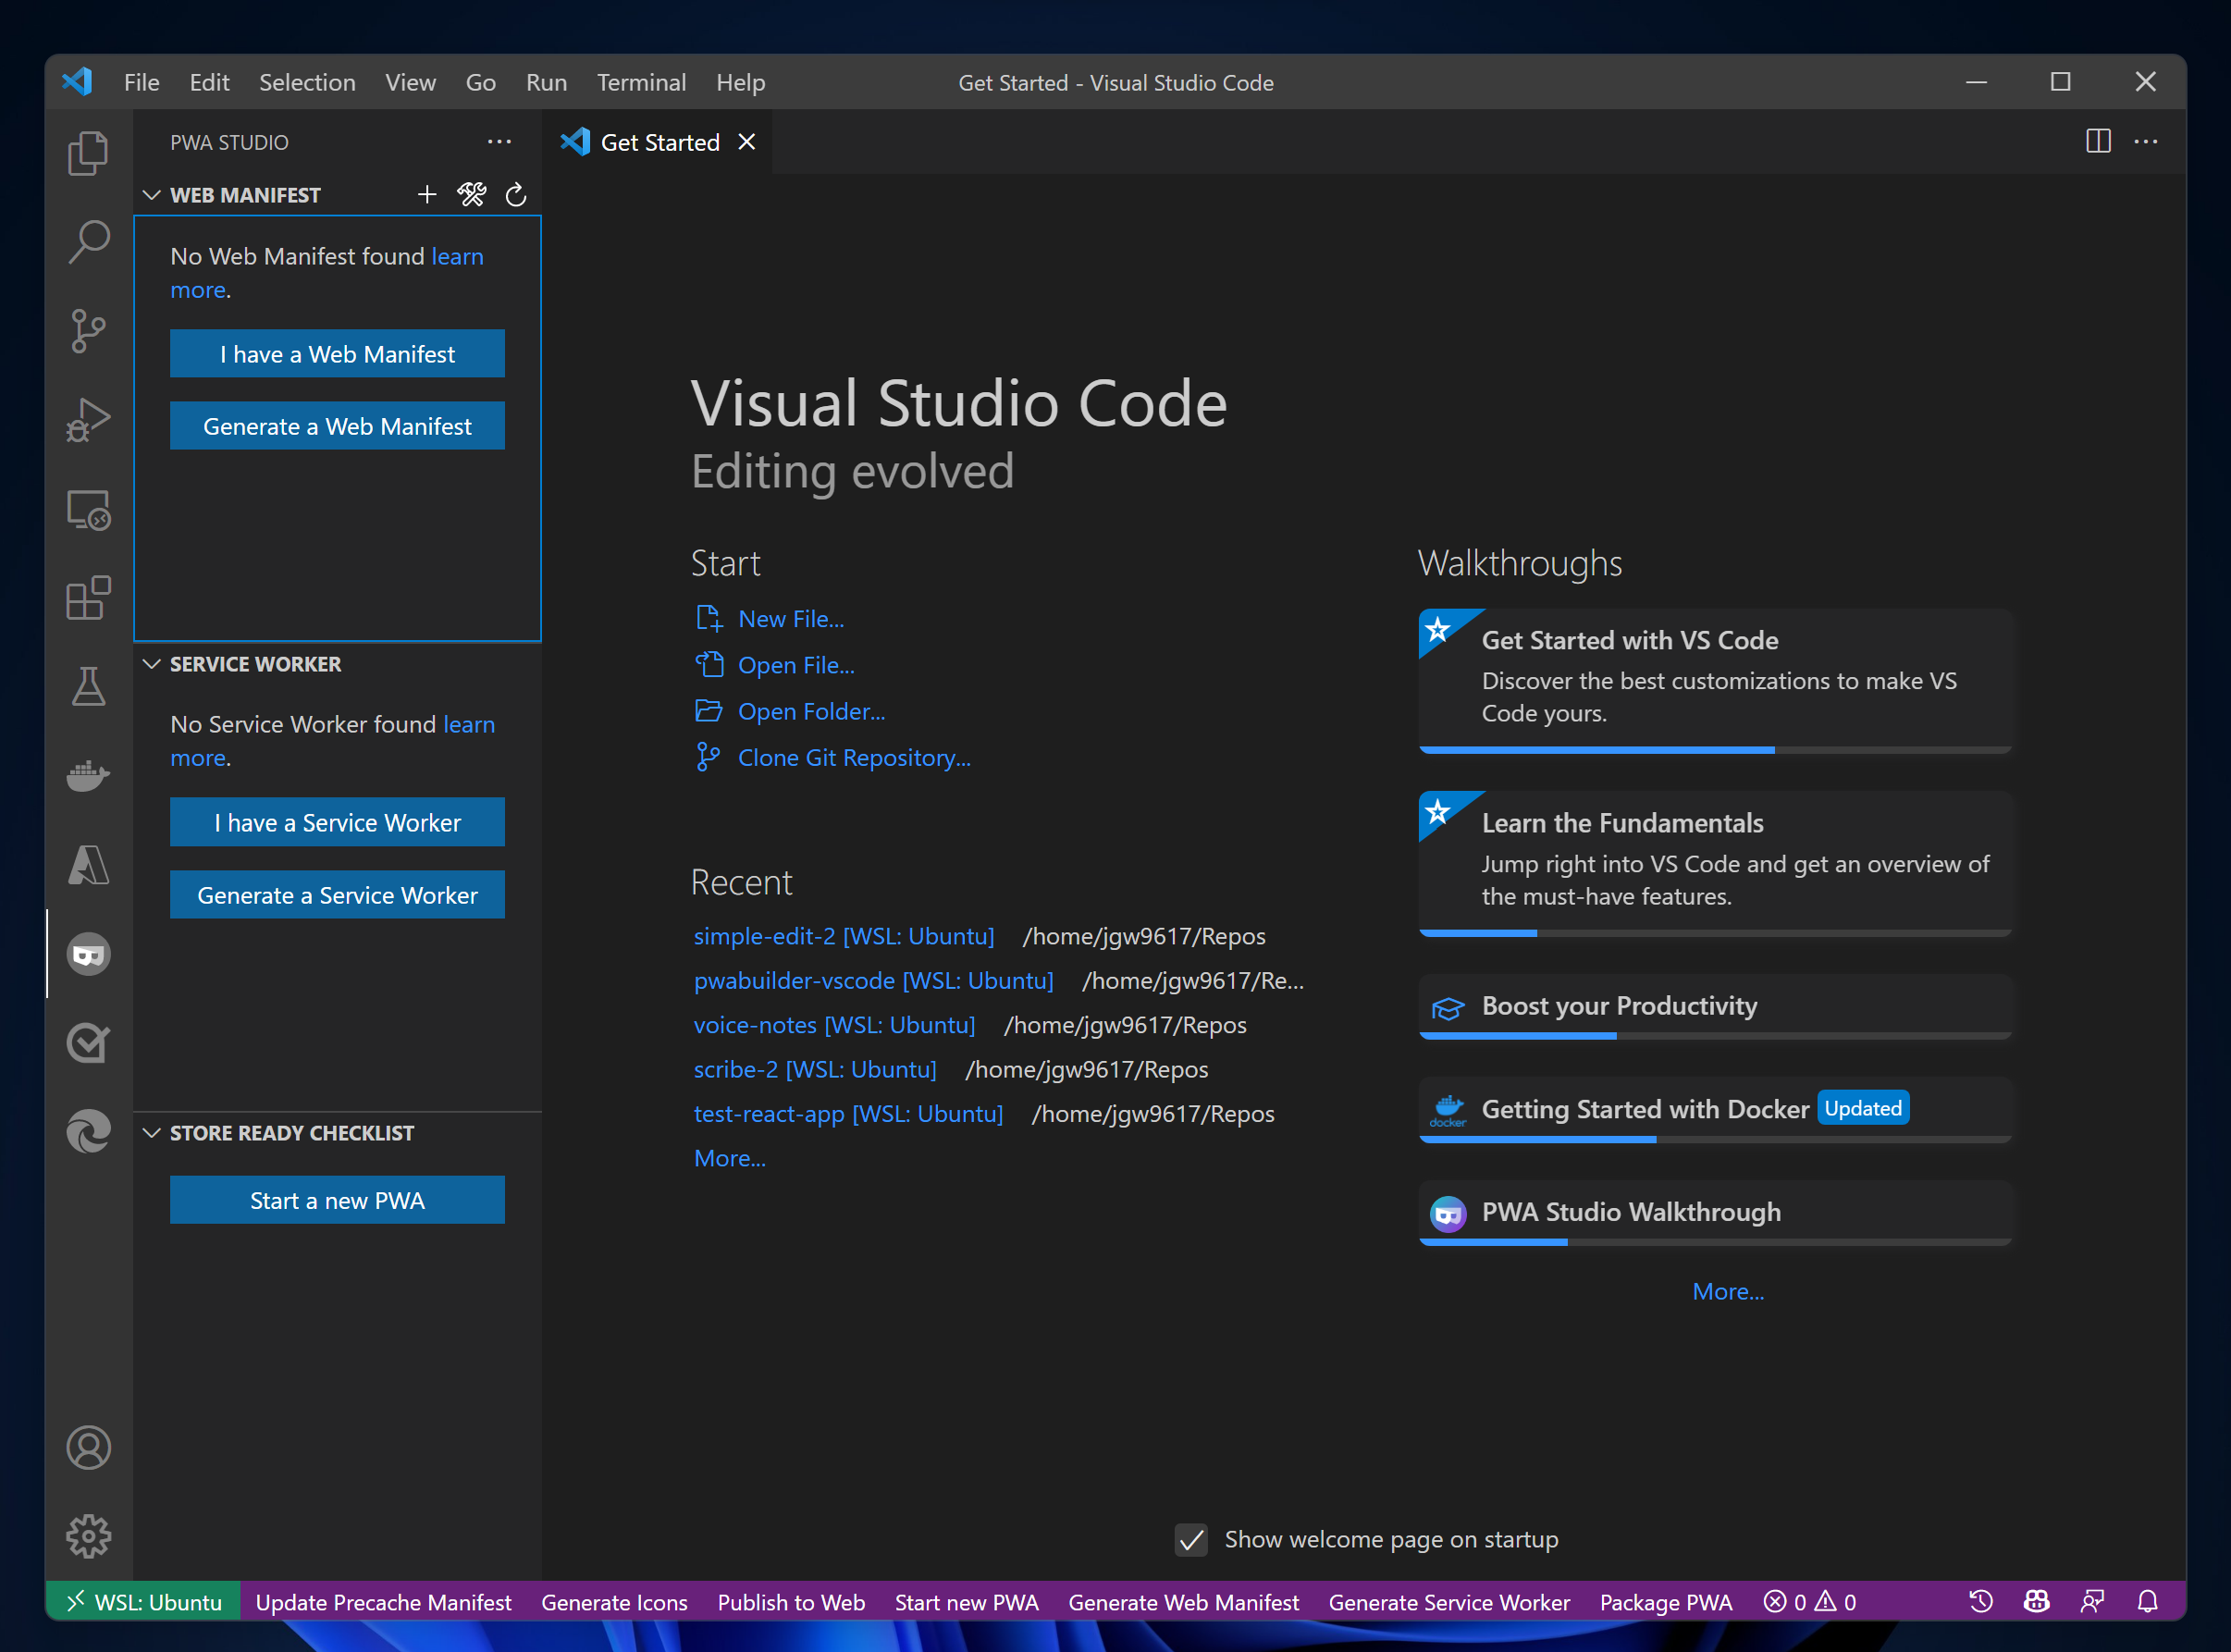 The Start a new PWA button on the left side of the VSCode Window